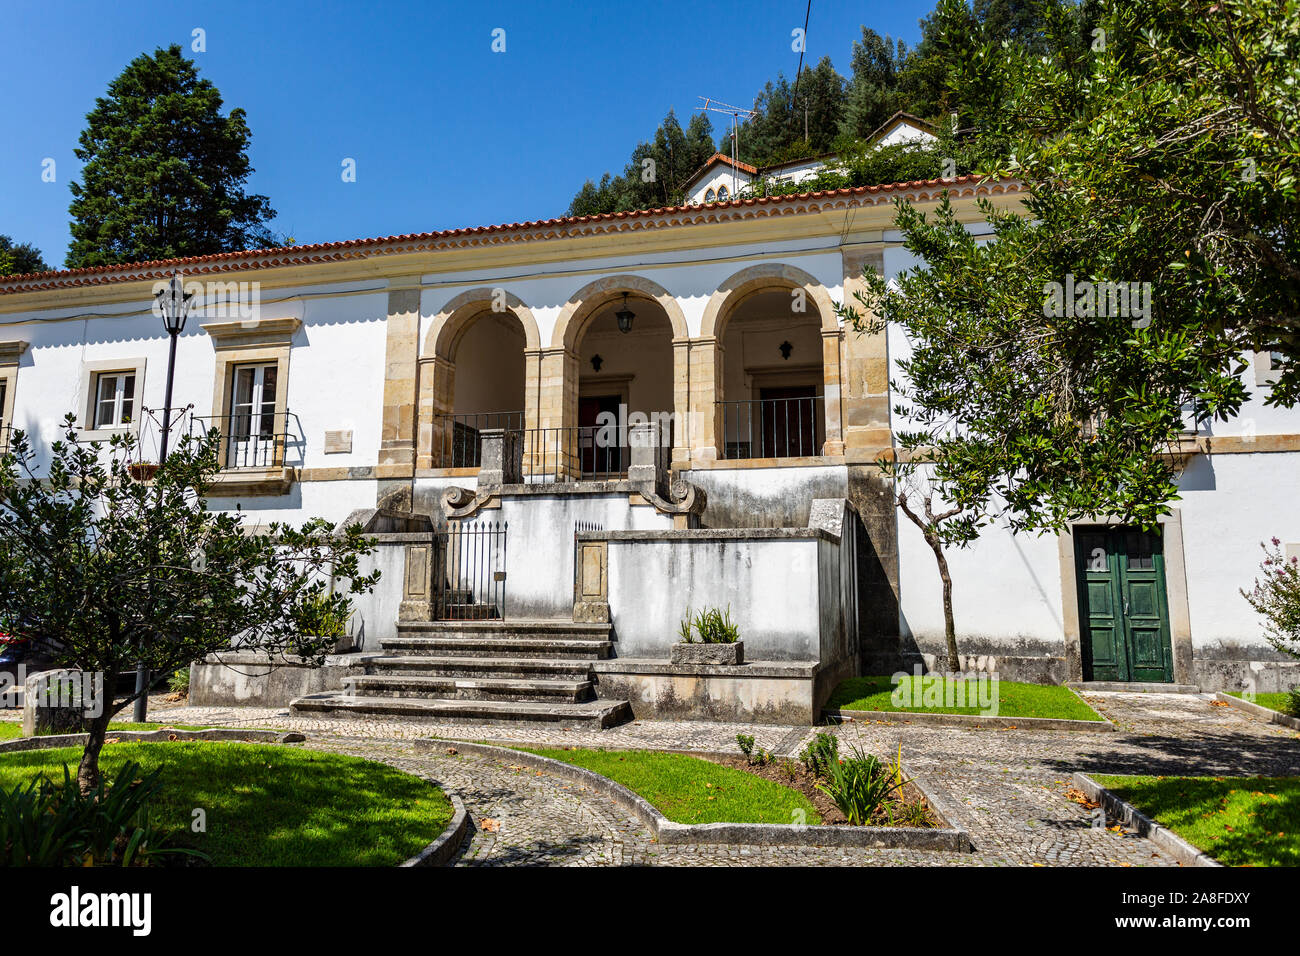 View of the former Priests House located in the front garden of the Monastery of Saint Mary of Lorvao, Coimbra, Portugal Stock Photo